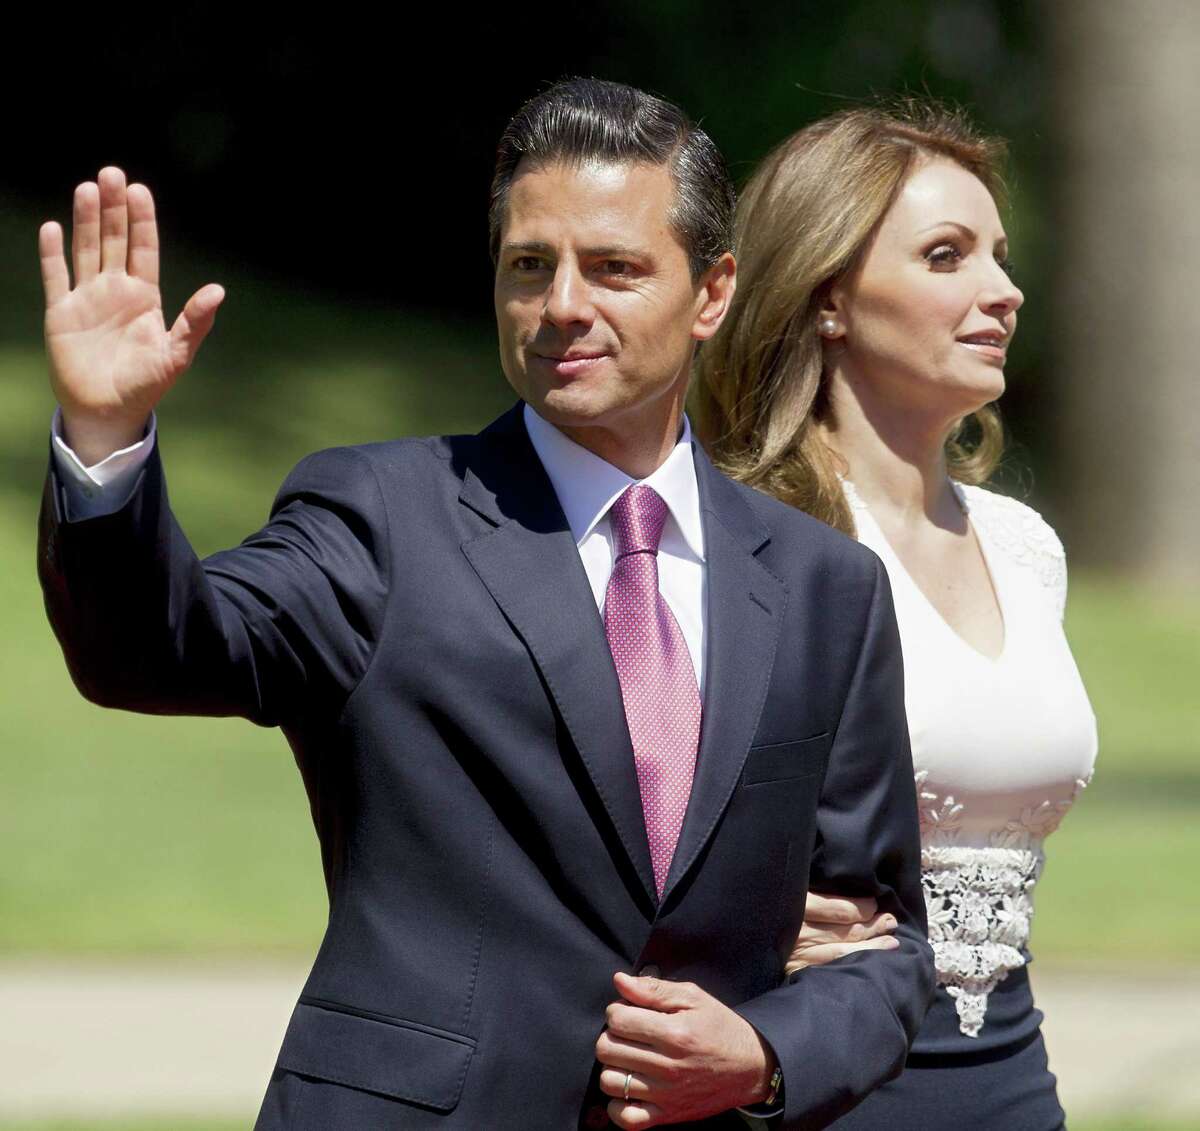 Mexican President Enrique Pena Nieto (L) next to his wife Angelica Rivera waves at the press in Vina Del Mar, Chile on March 11, 2014 after Chilean President Michelle Bachelet's inauguration. Socialist Bachelet took the oath of office as president of Chile Tuesday, returning to power after four years with a reform agenda to reduce social disparities in this prosperous South American countrywave to the press at Cerro Castillo Palace in Vina Del Mar, on March 11, 2014 after Bachelet's inauguration. AFP/Claudio ReyesClaudio Reyes/AFP/Getty Images